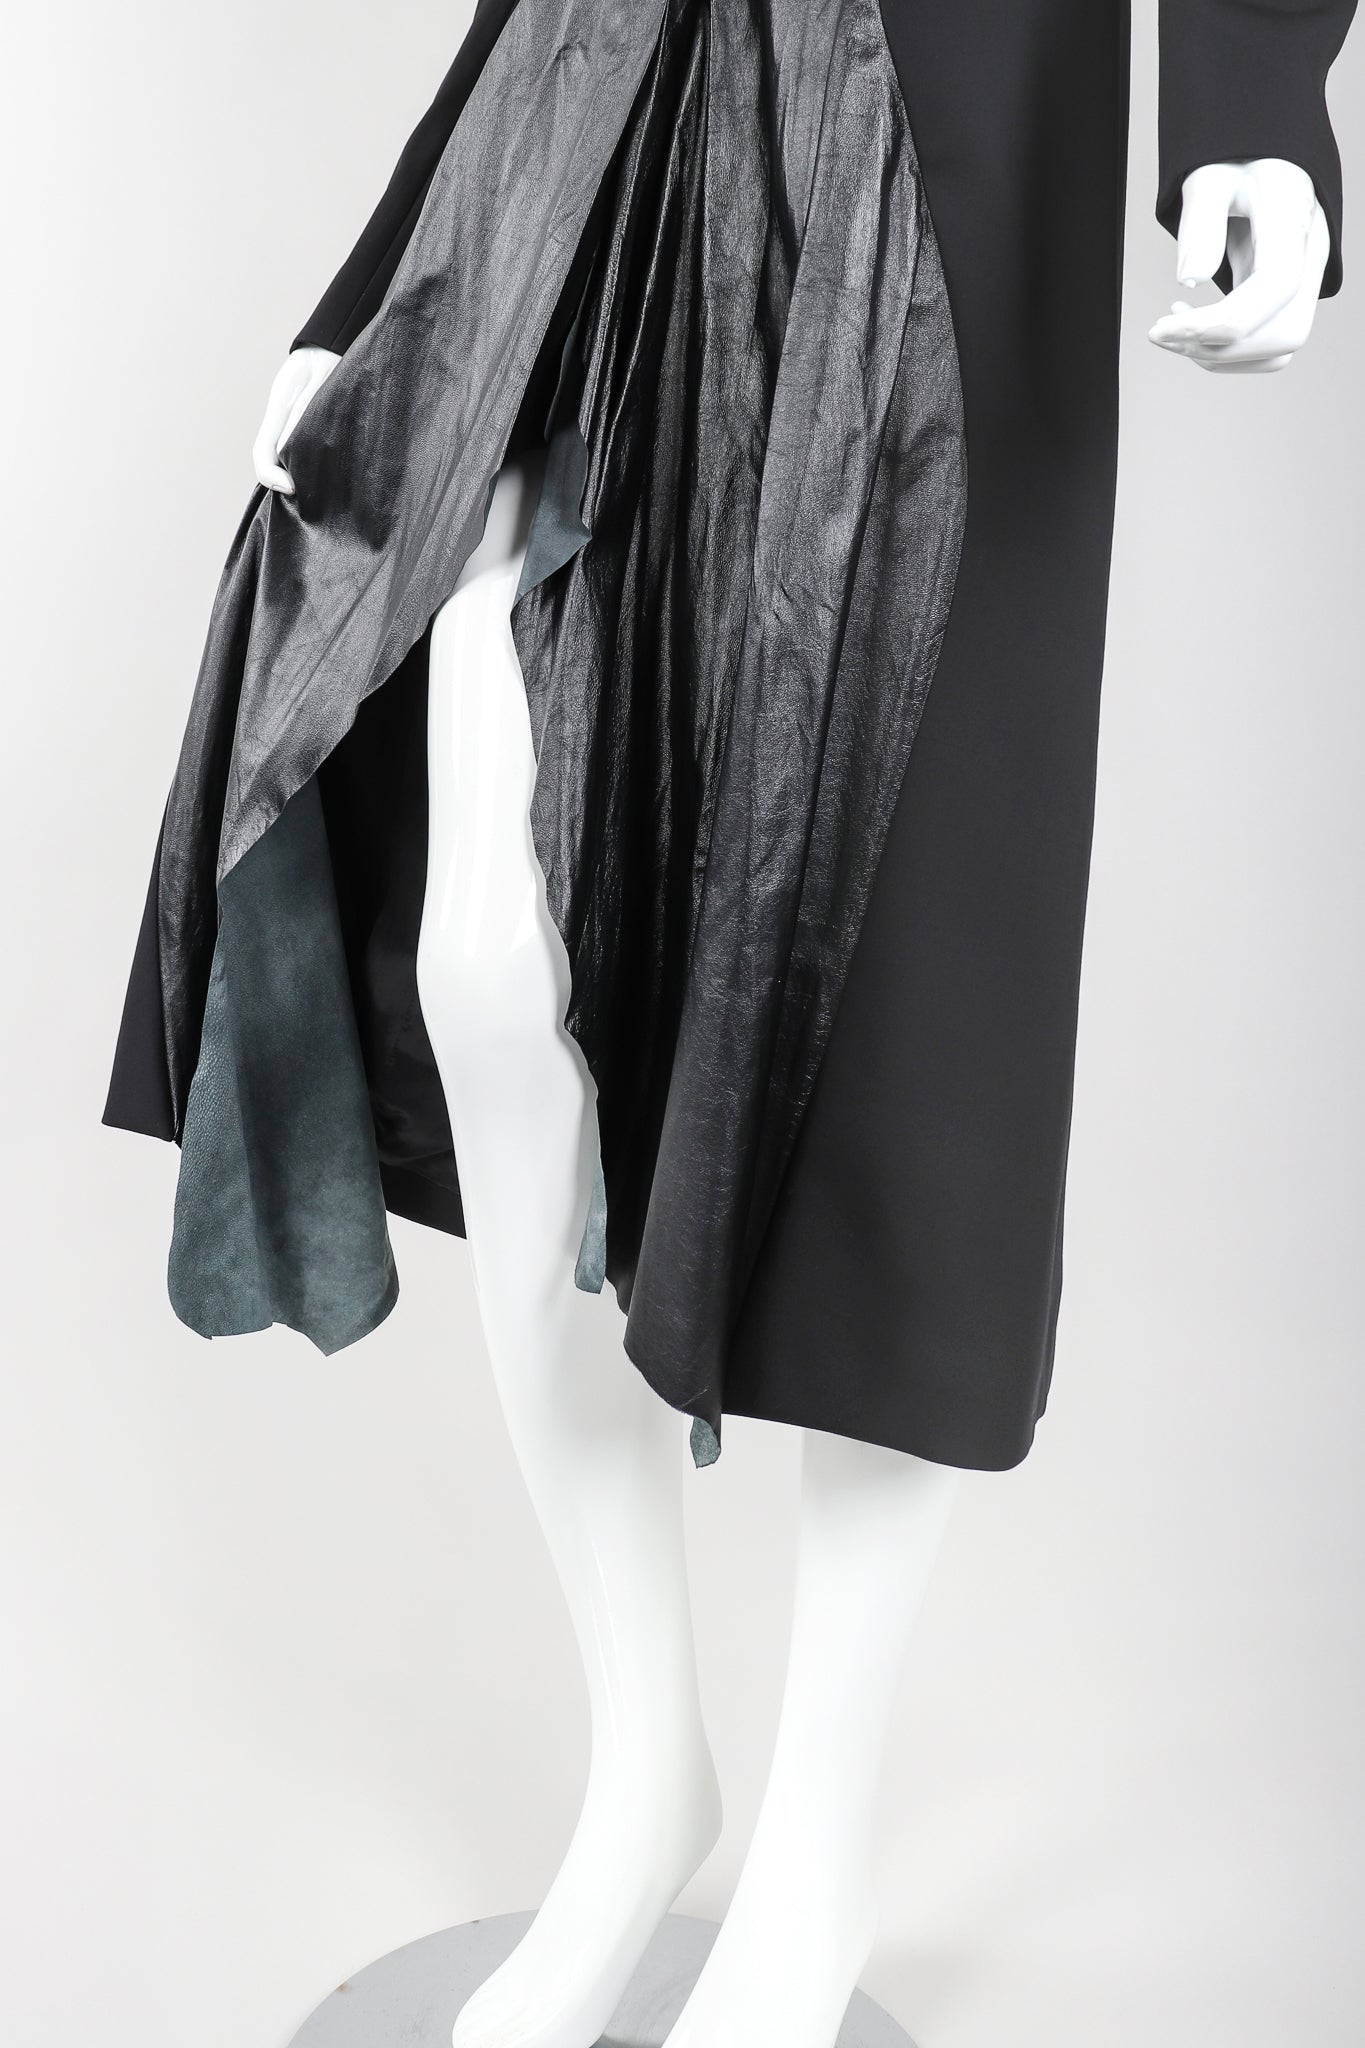 Recess Vintage Mugler Black Leather and Wool Tail Coat on Mannequin, Leather Skirt View